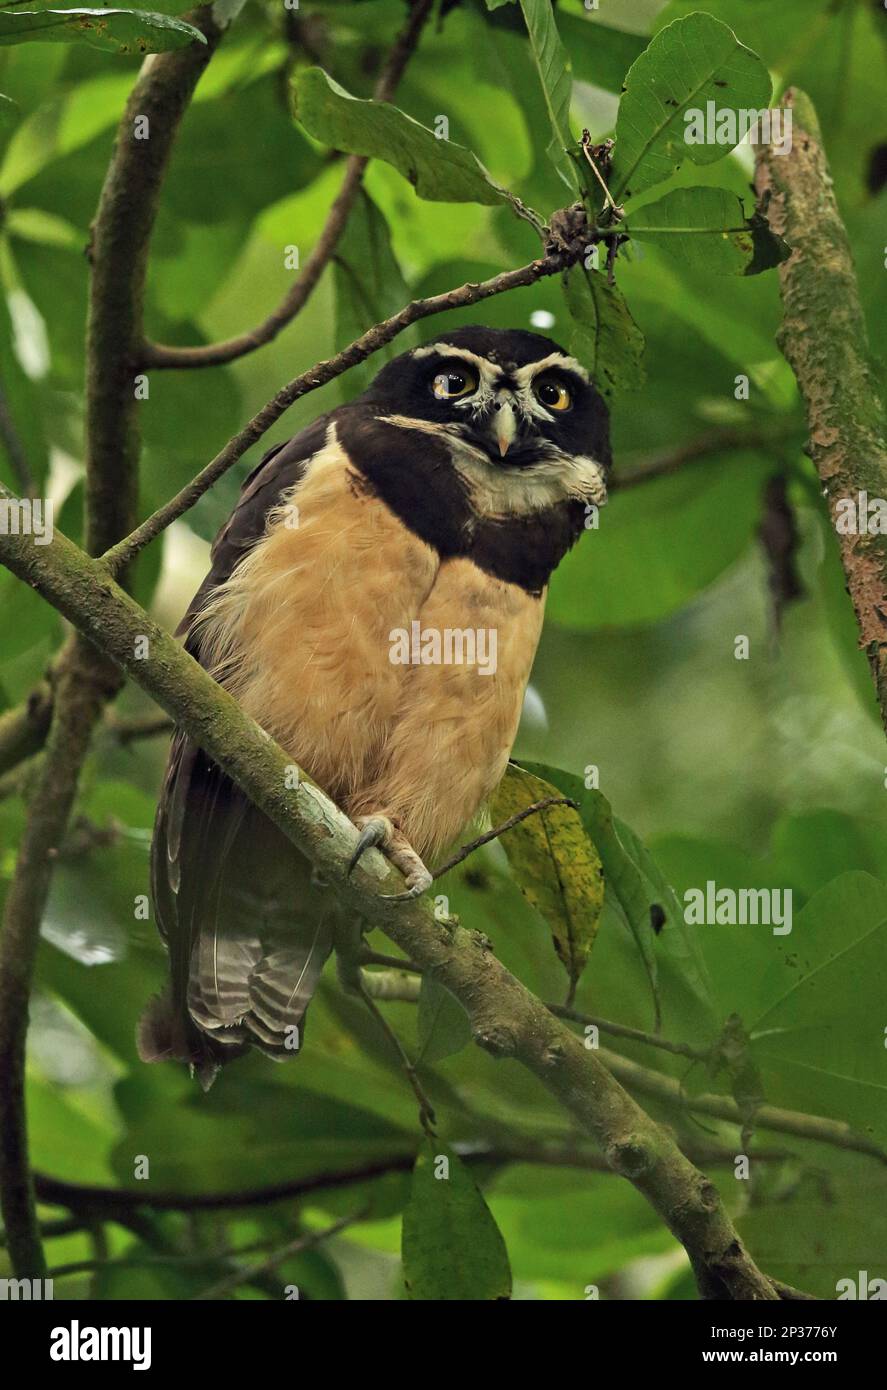 Spectacled Owl (Pulsatrix perspicillata chapmani) adult, perched on branch, El Valle, Panama Stock Photo